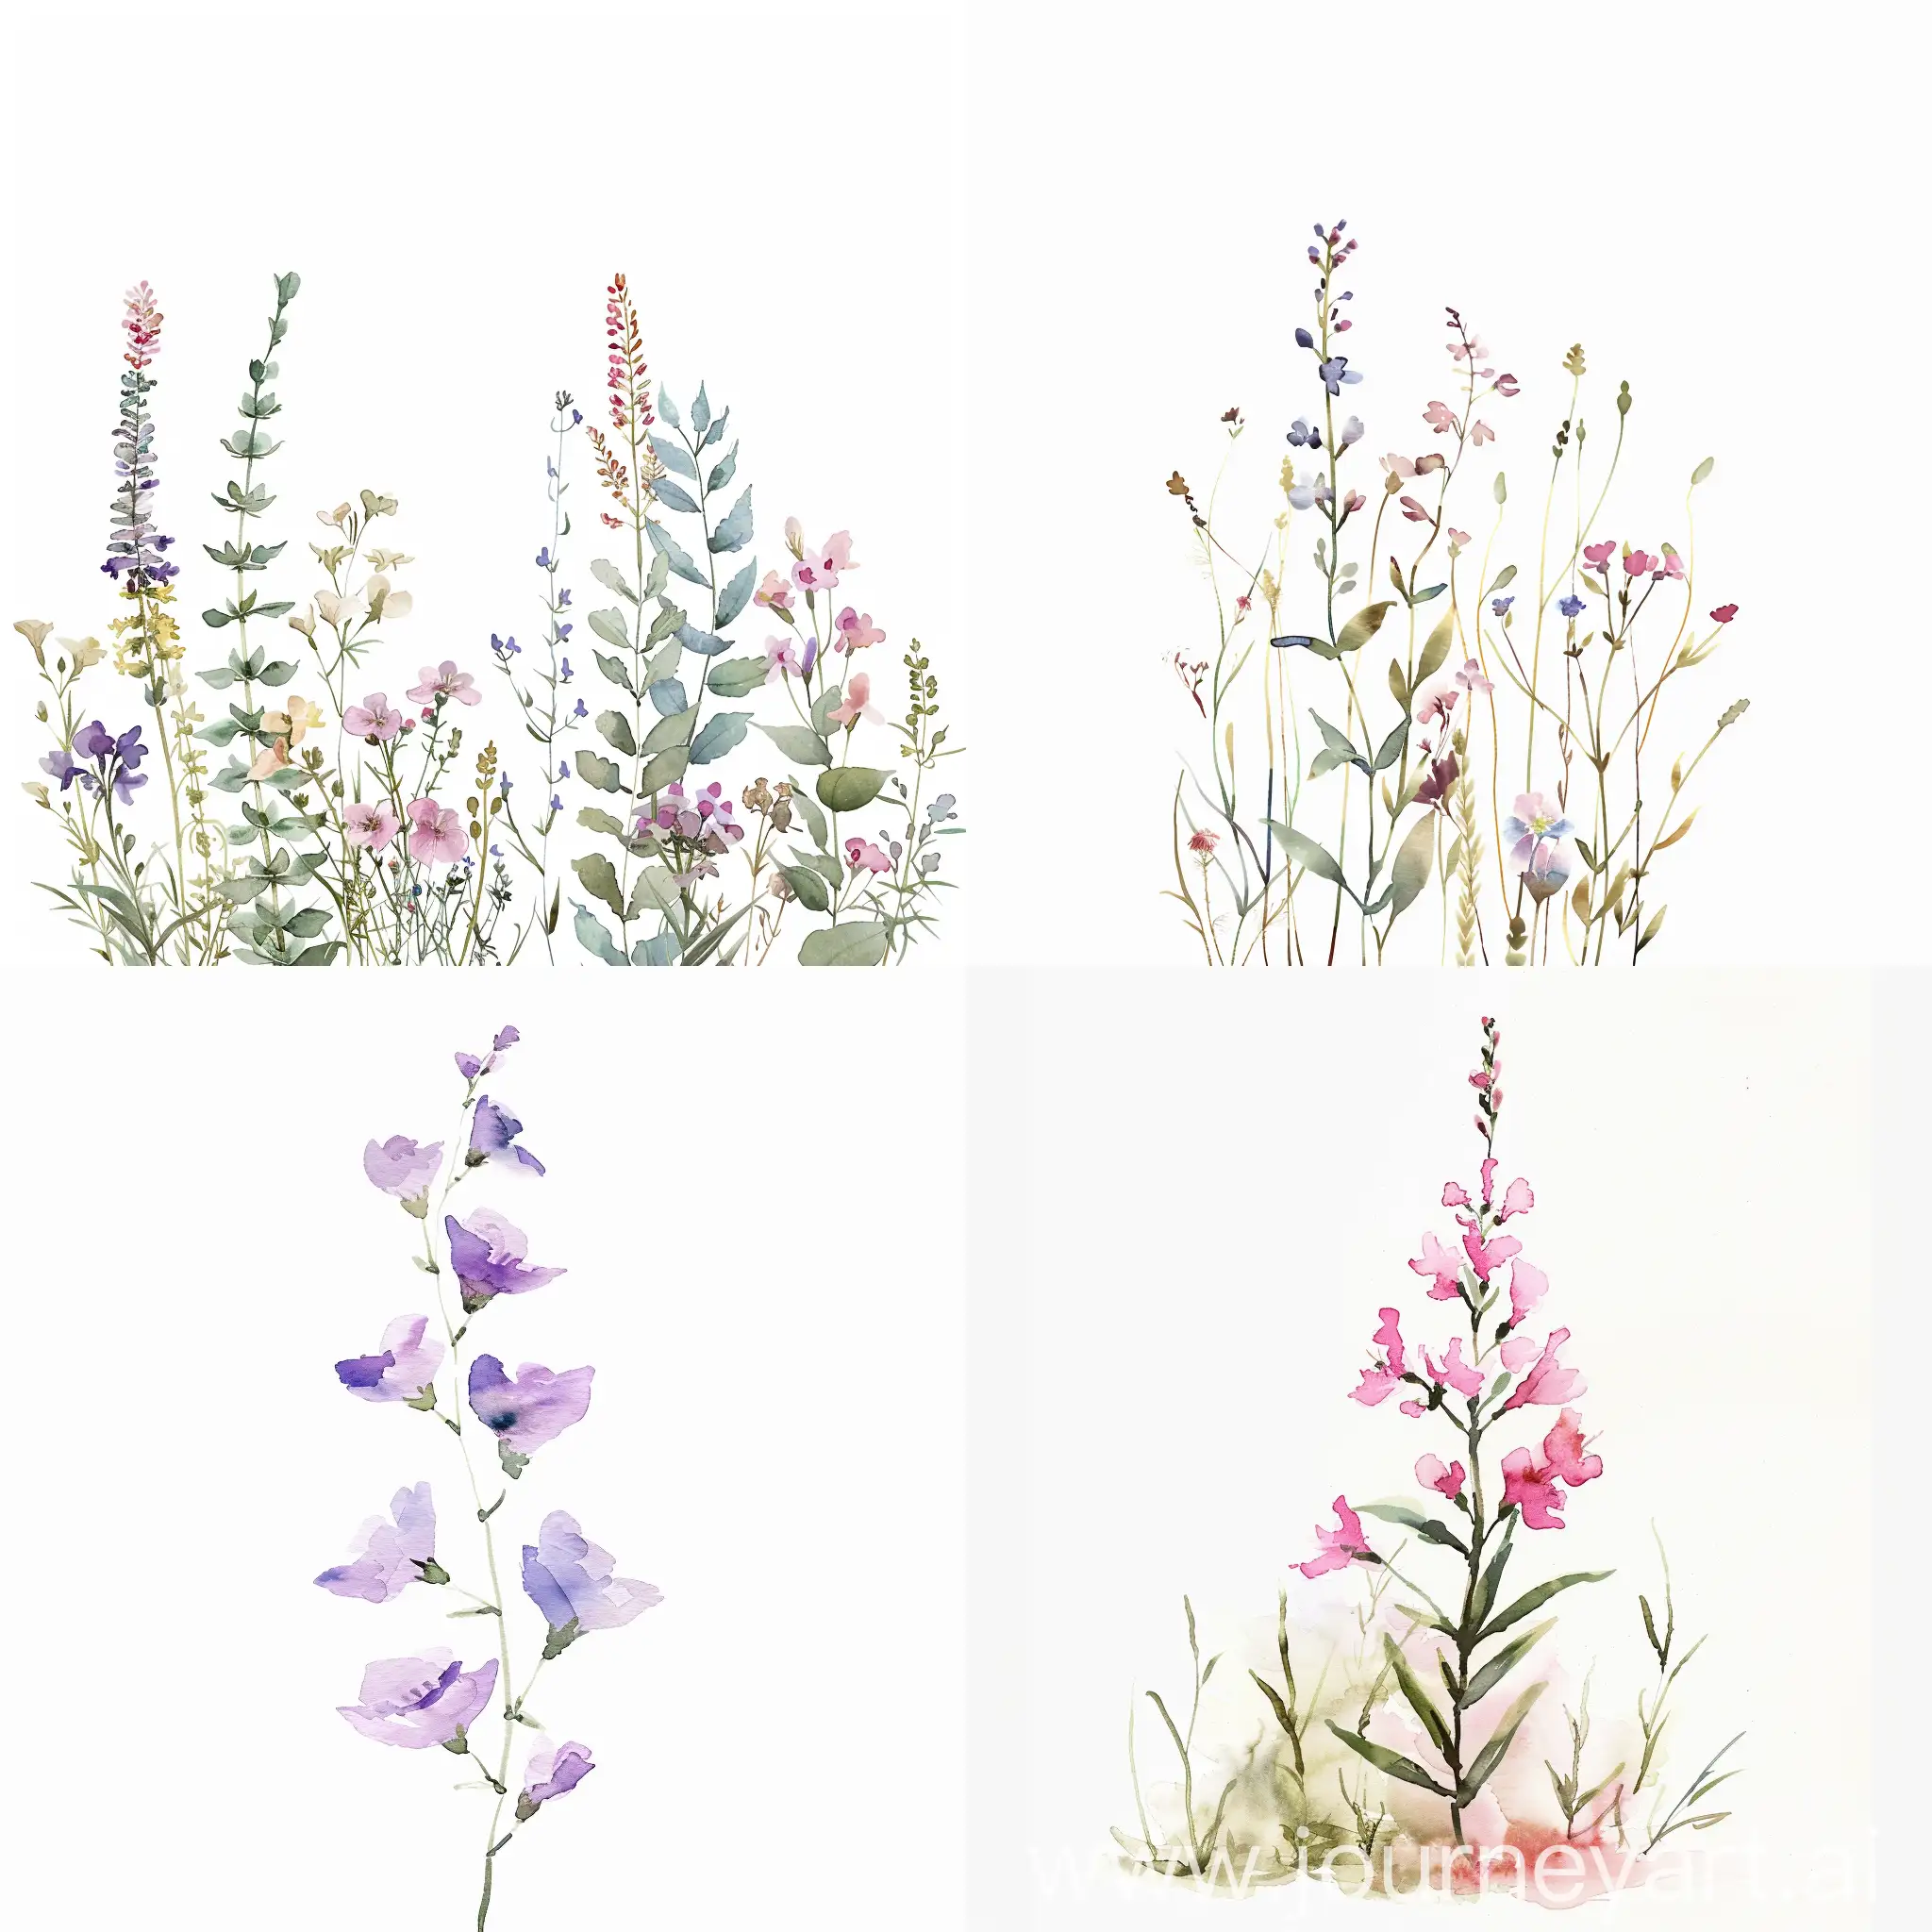 Standing-Wildflower-Watercolor-Painting-on-White-Background